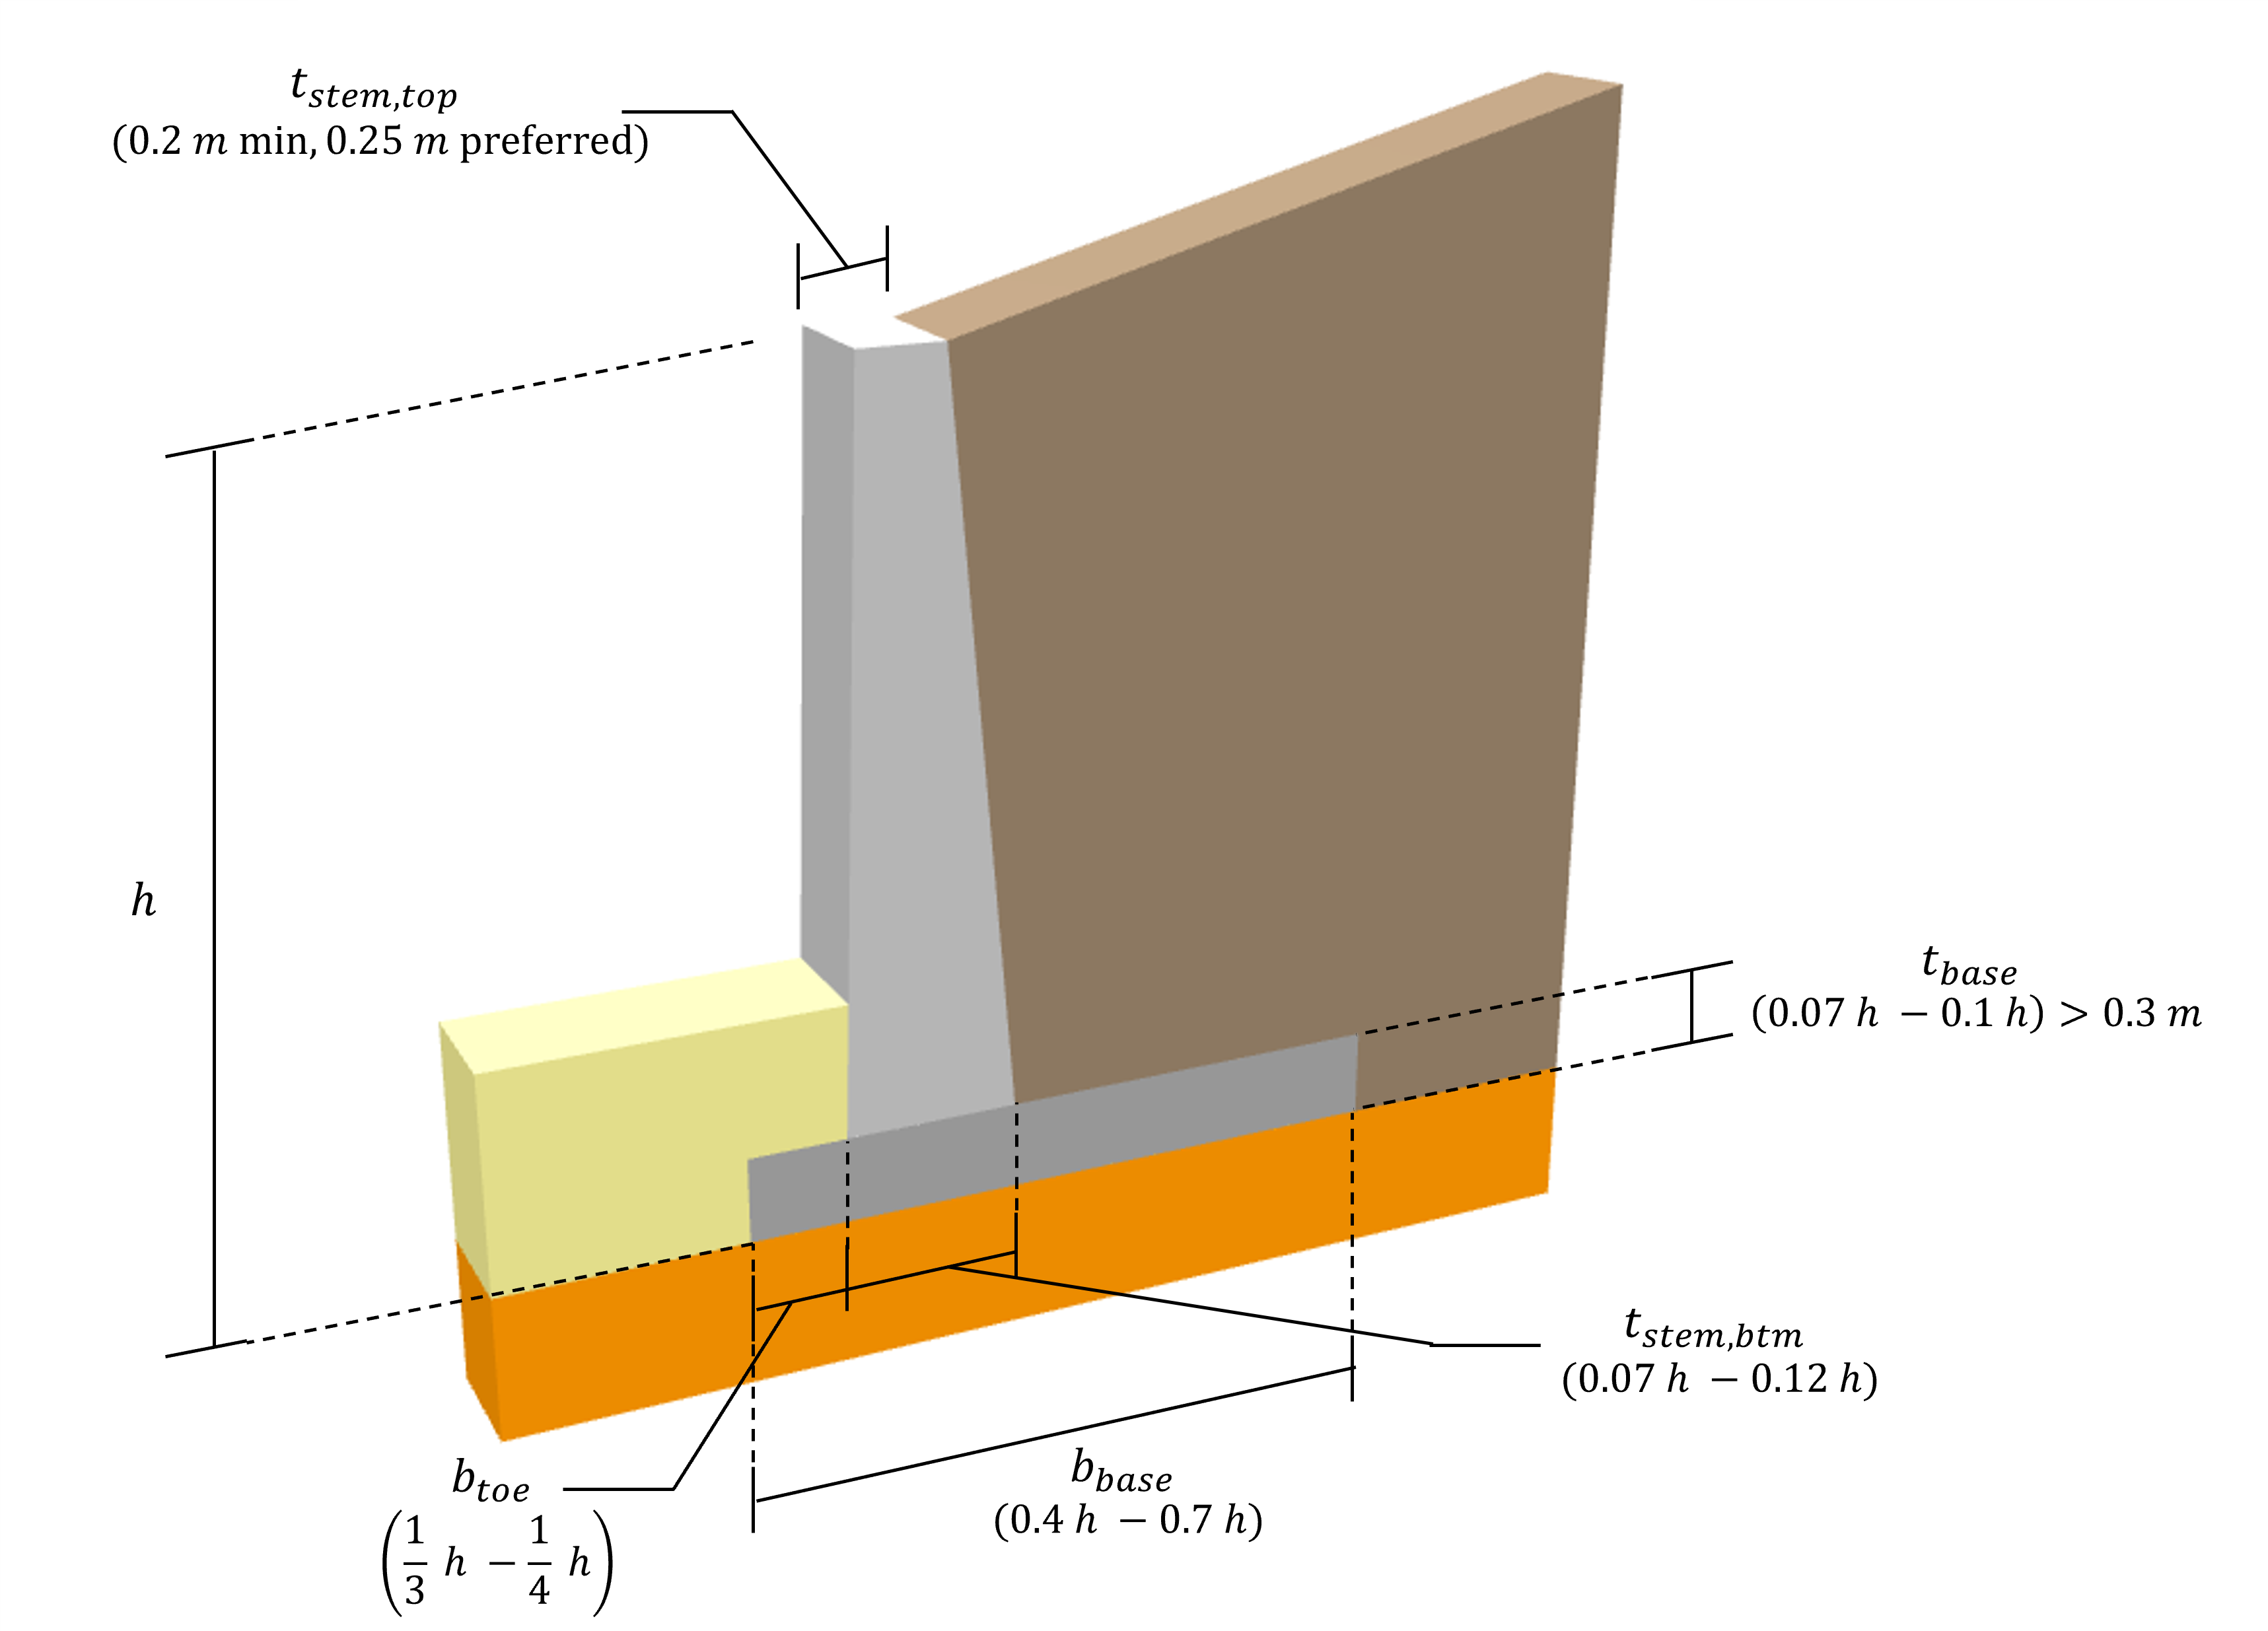 Skyciv Concrete Retaining Wall Design Example showing recommended ACI dimensions